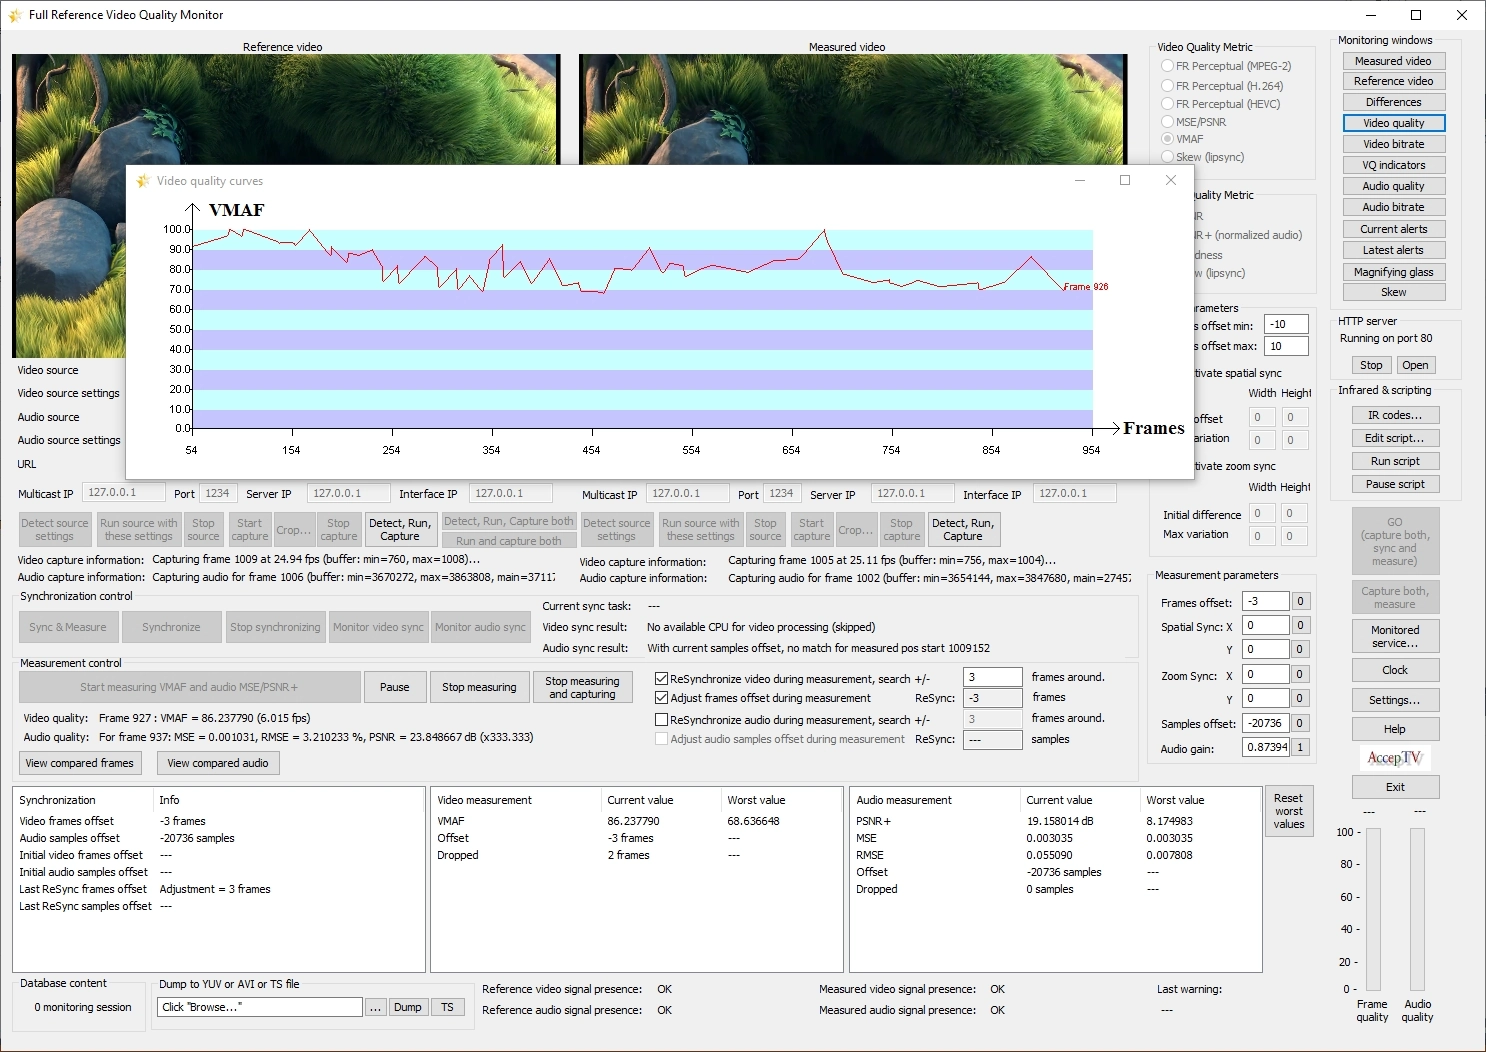 Screenshot of Full Reference Video Quality Monitor #14